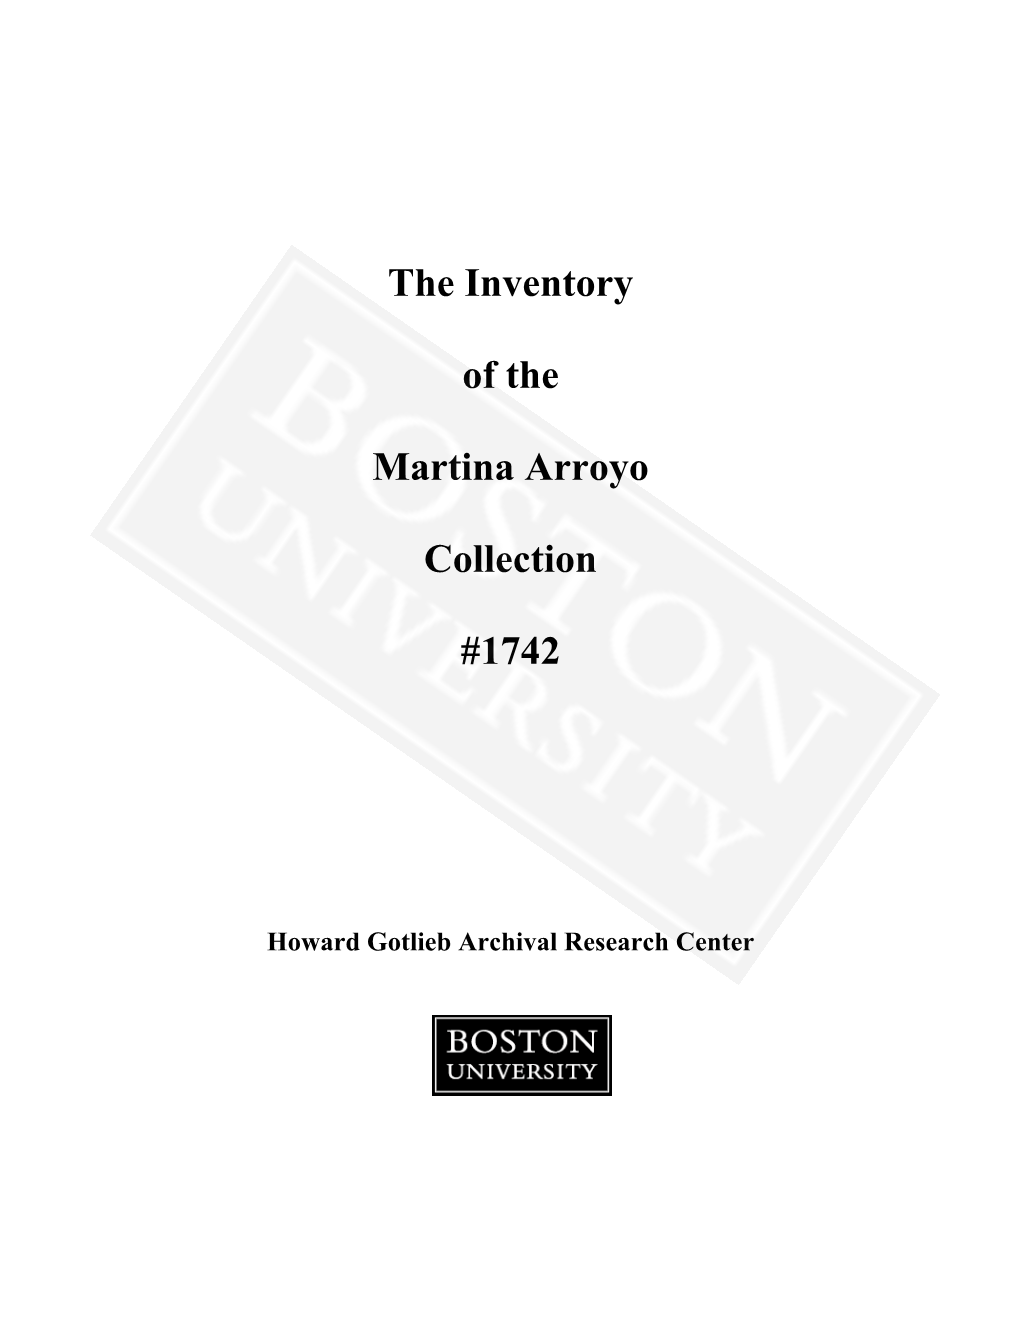 The Inventory of the Martina Arroyo Collection #1742